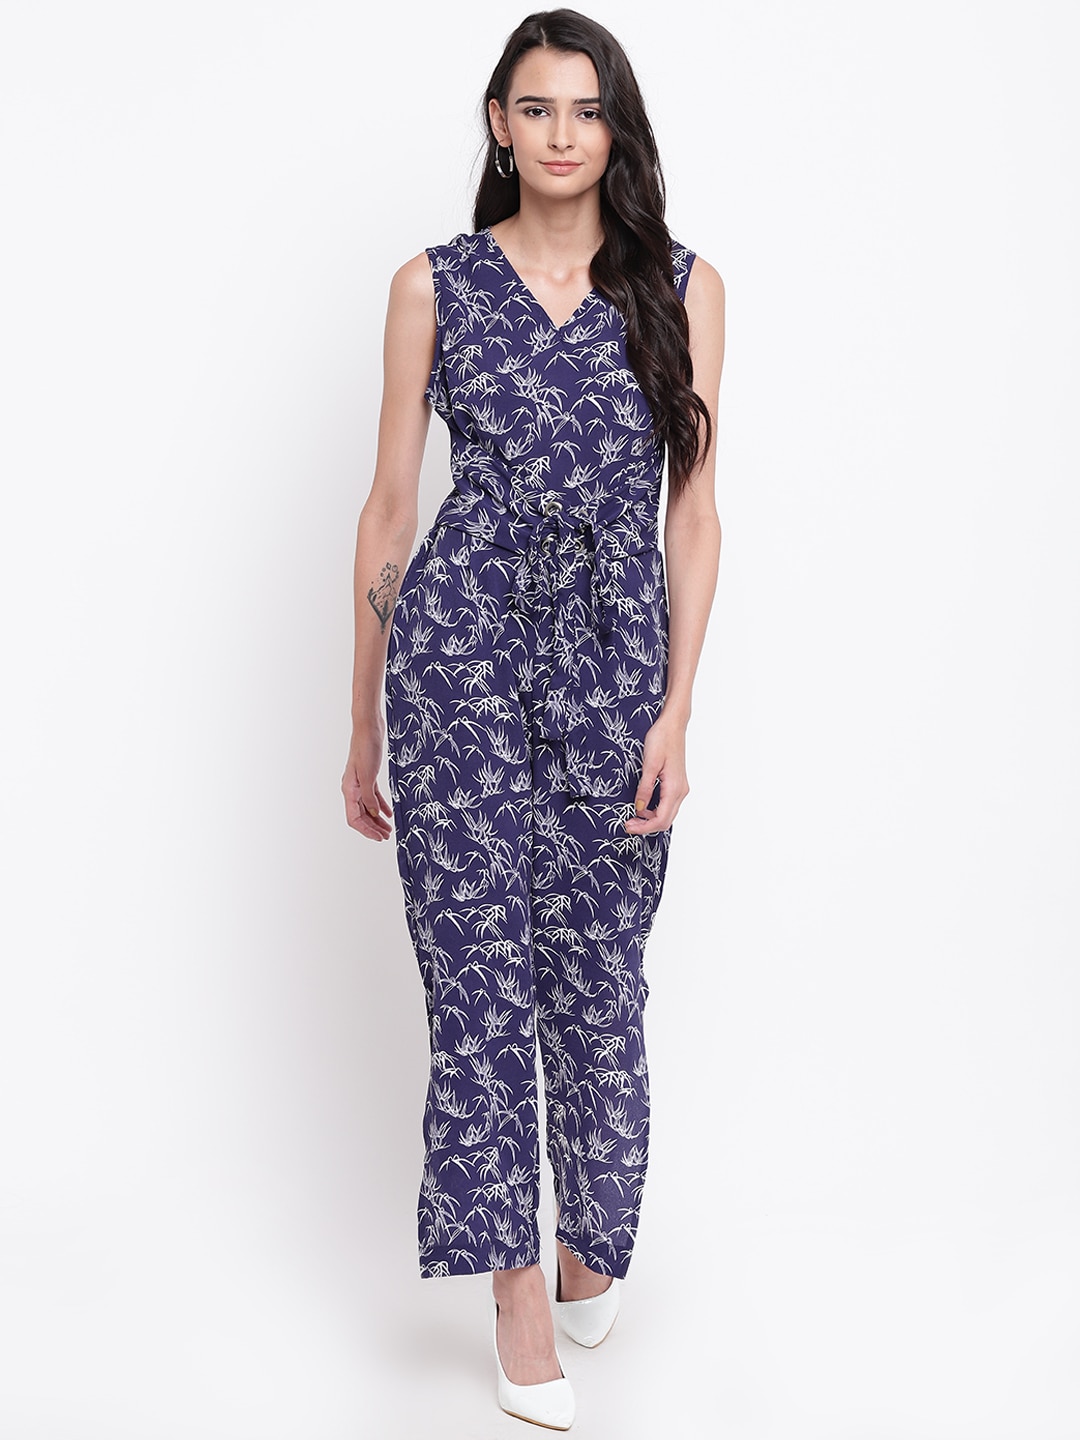 Belle Fille Navy Blue & White Printed Basic Jumpsuit Price in India